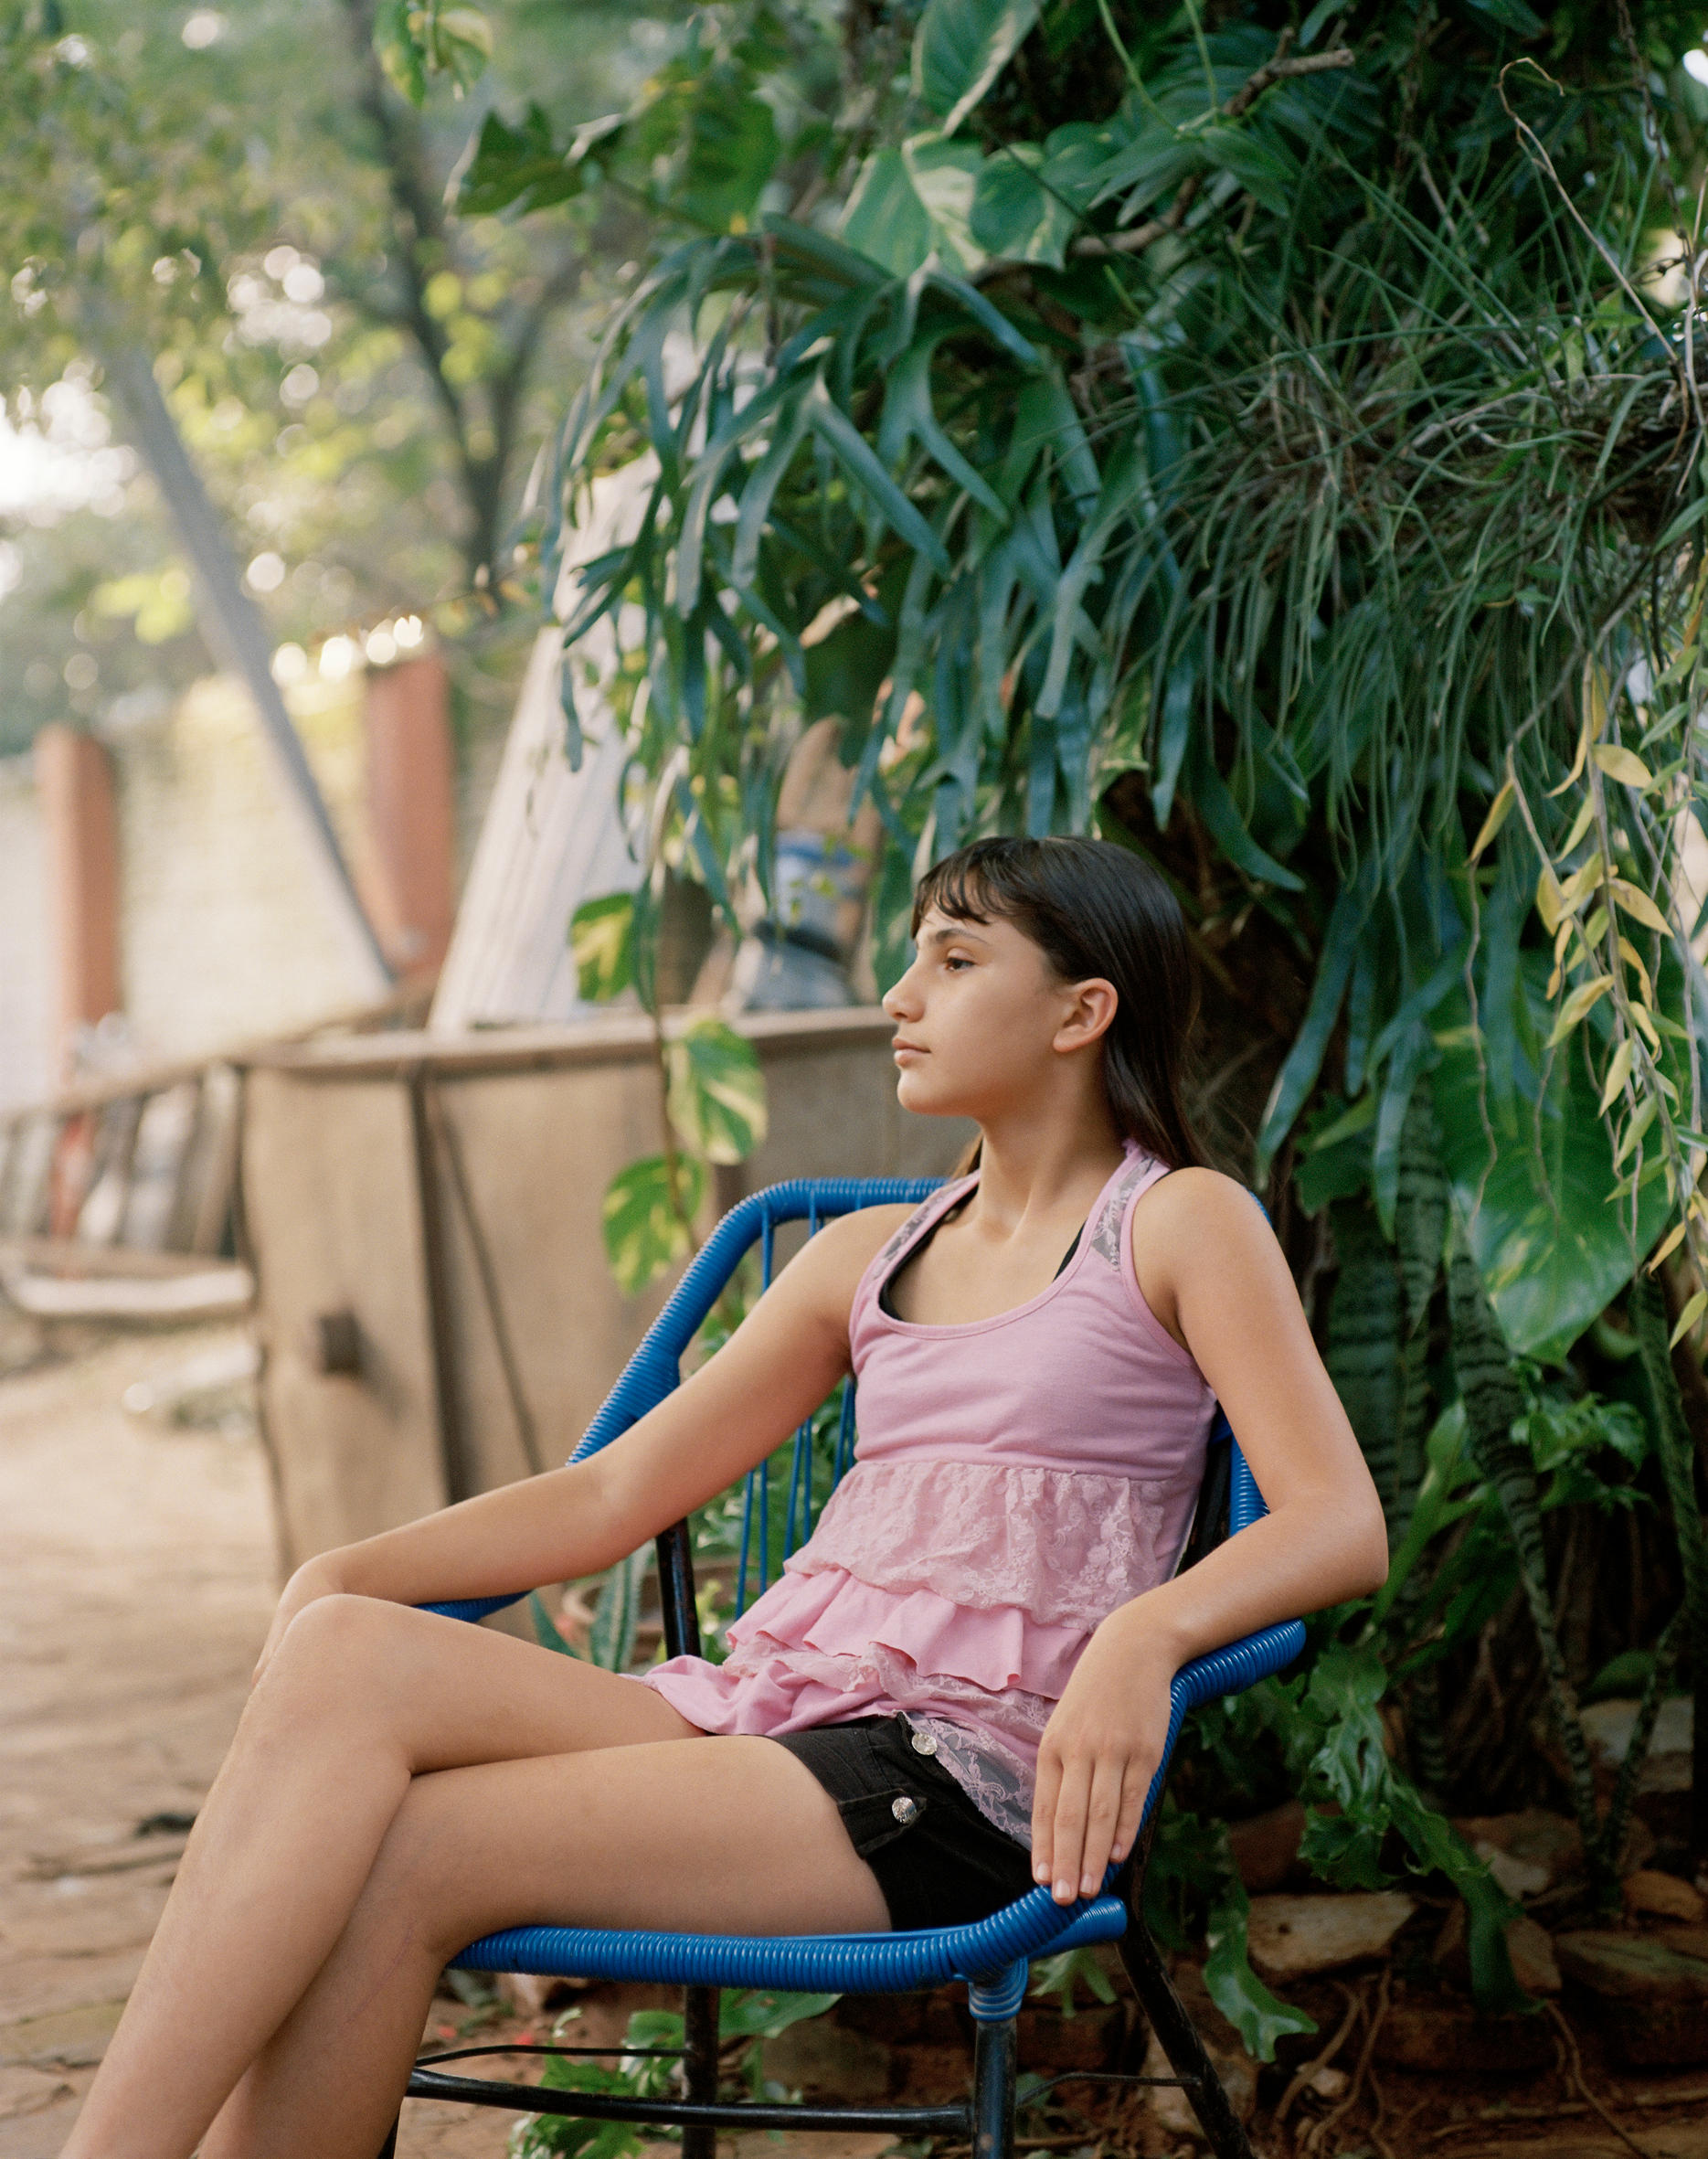 The profile of a girl sitting on a chair in front of a green bush.